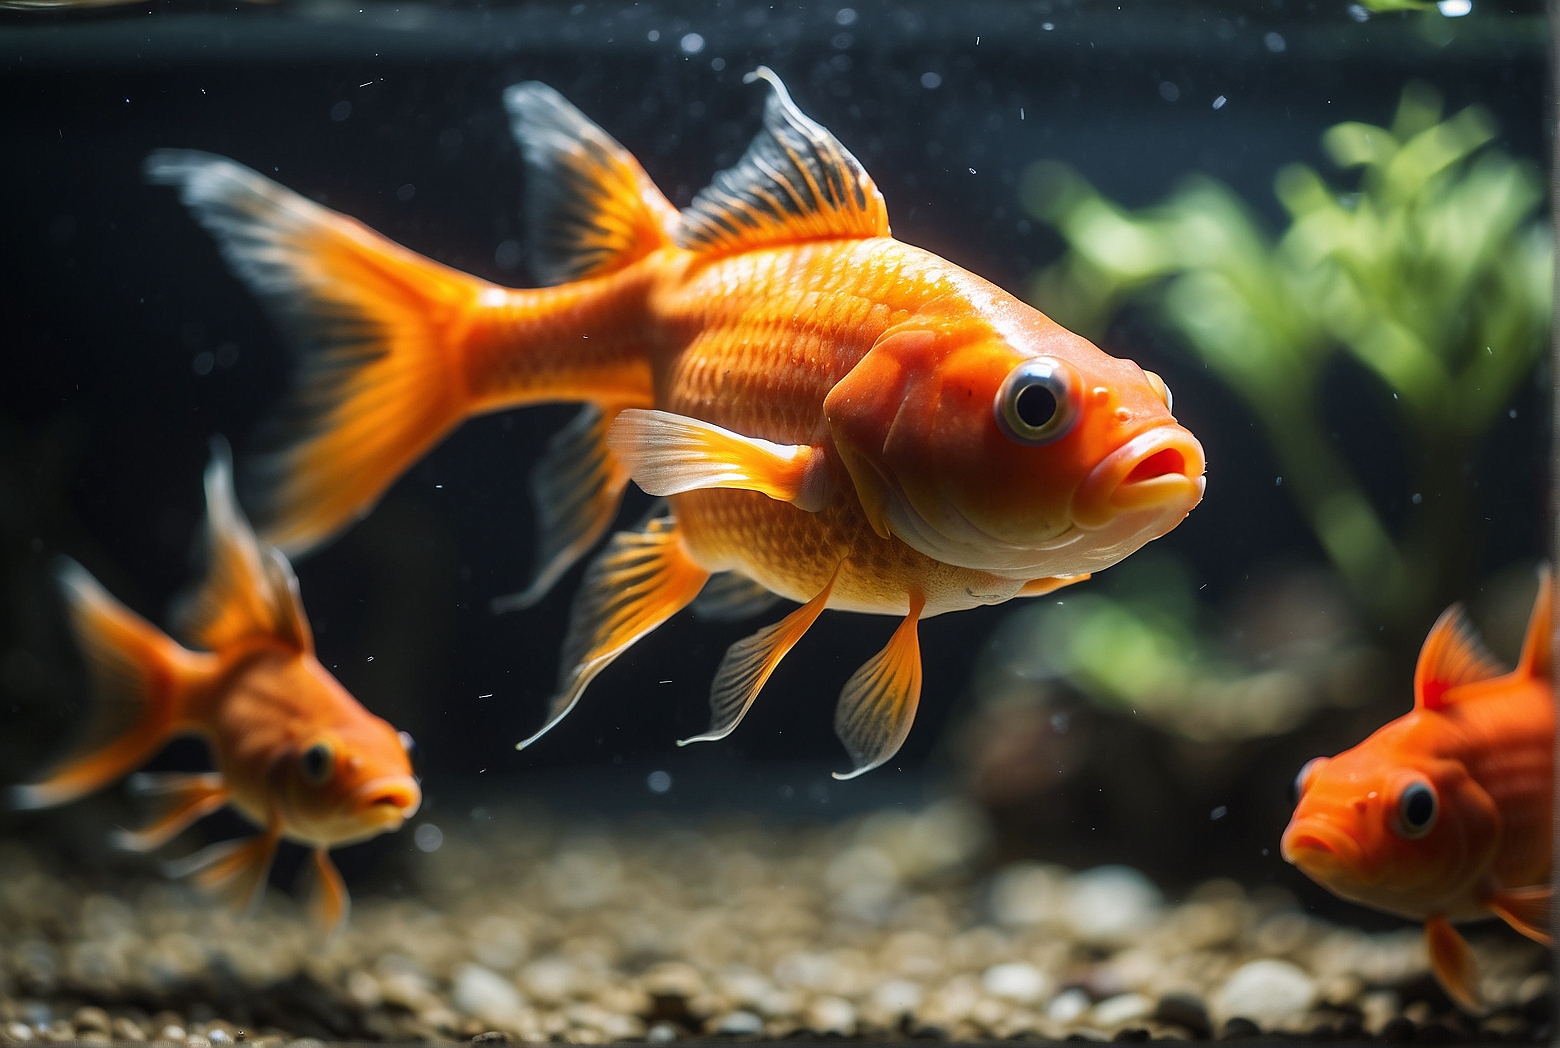 Can Mollies and Goldfish Coexist in the Same Tank?